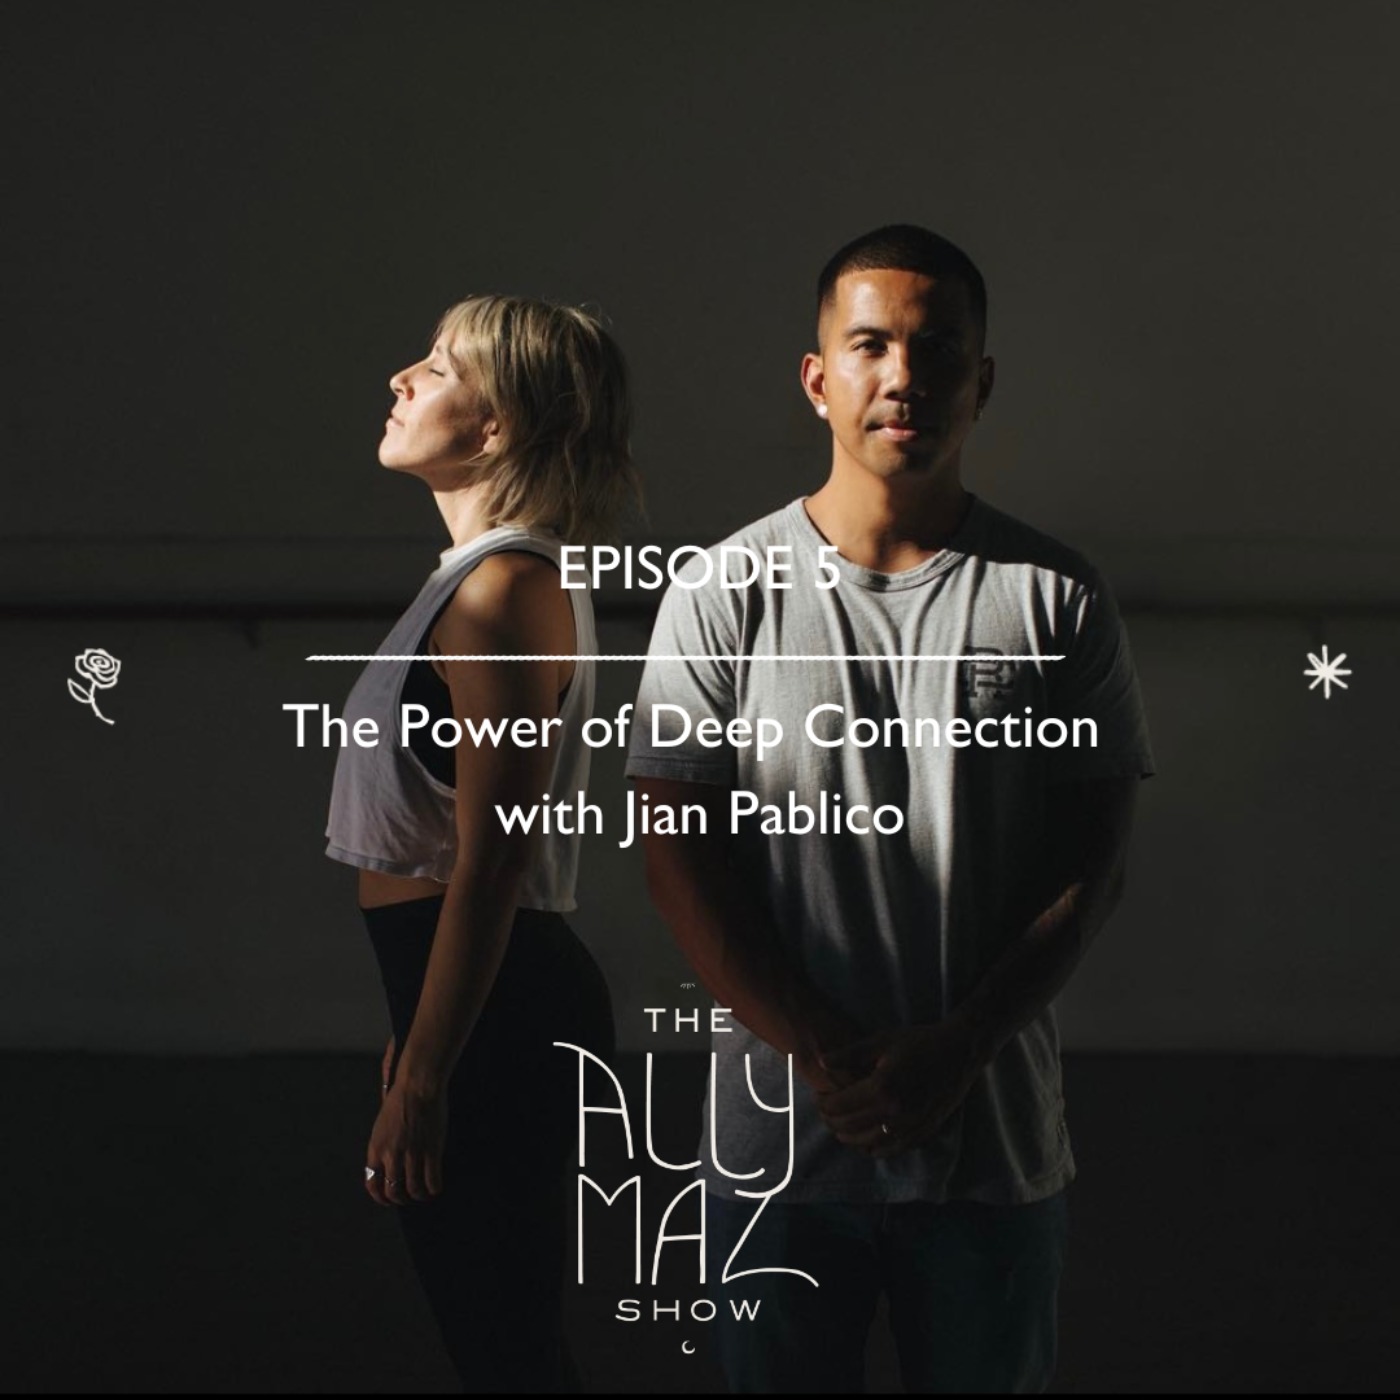 The Ally Maz Show: The Power of Deep Connection with Jian Pablico